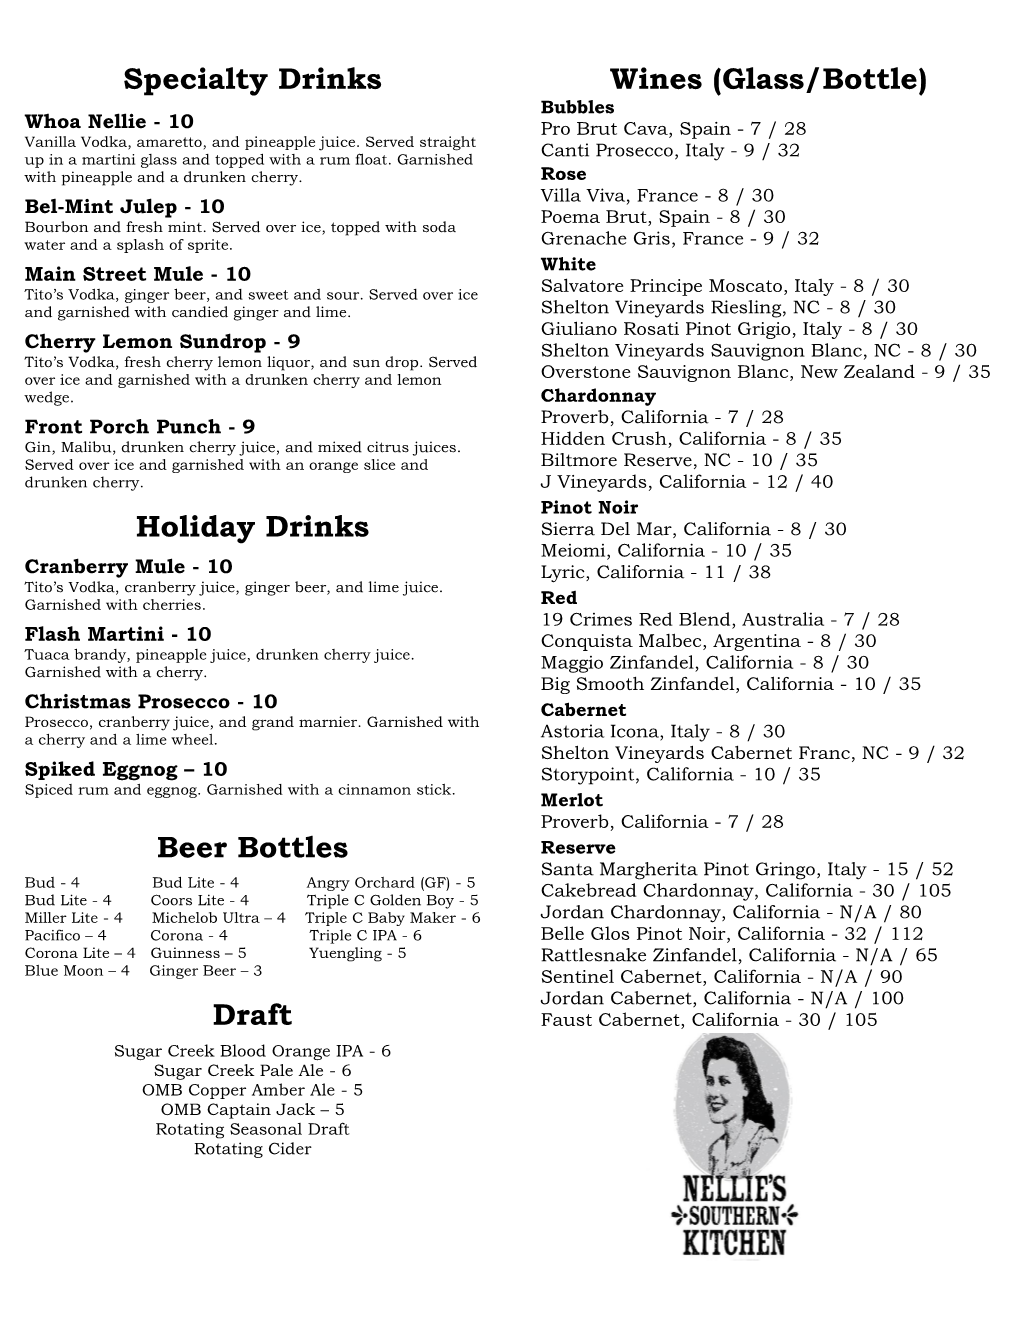 Specialty Drinks Holiday Drinks Beer Bottles Draft Wines (Glass/Bottle)